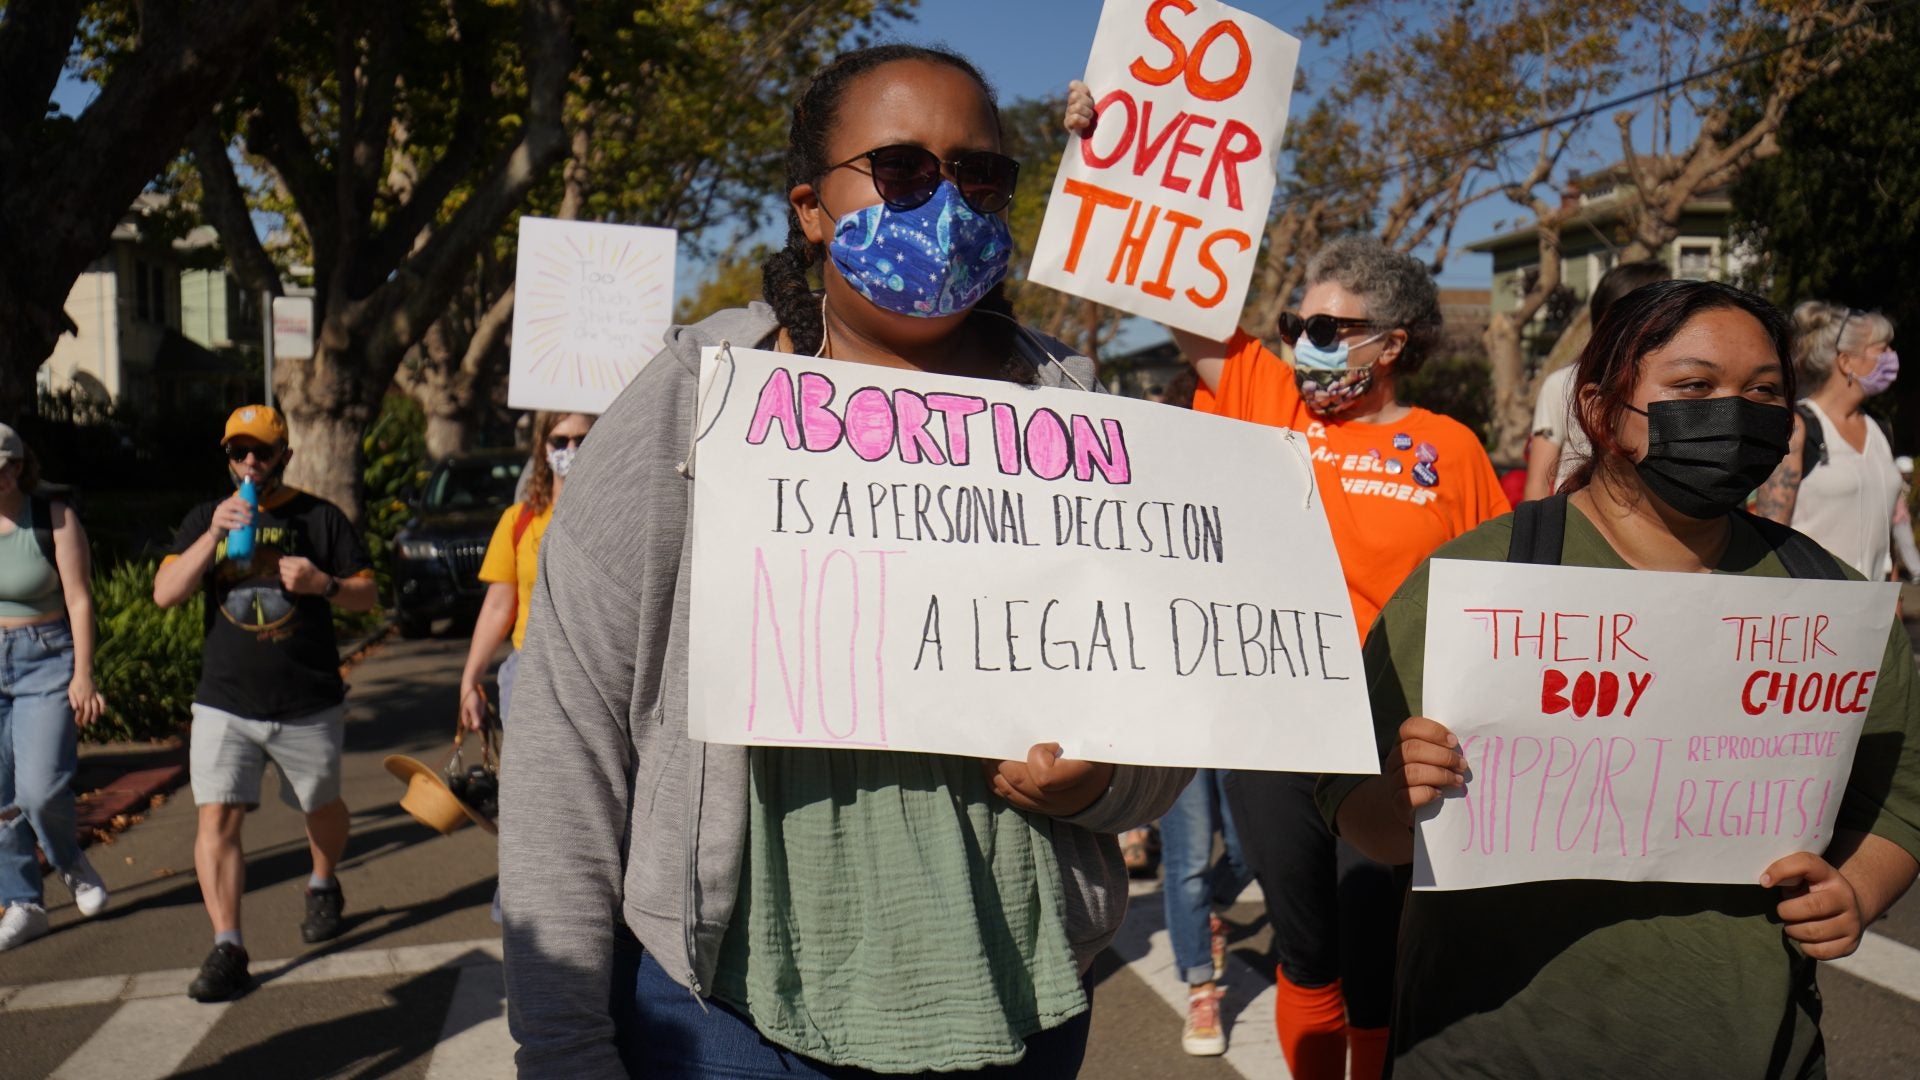 Roe v. Wade Was Overturned One Year Ago: What Happens Now?